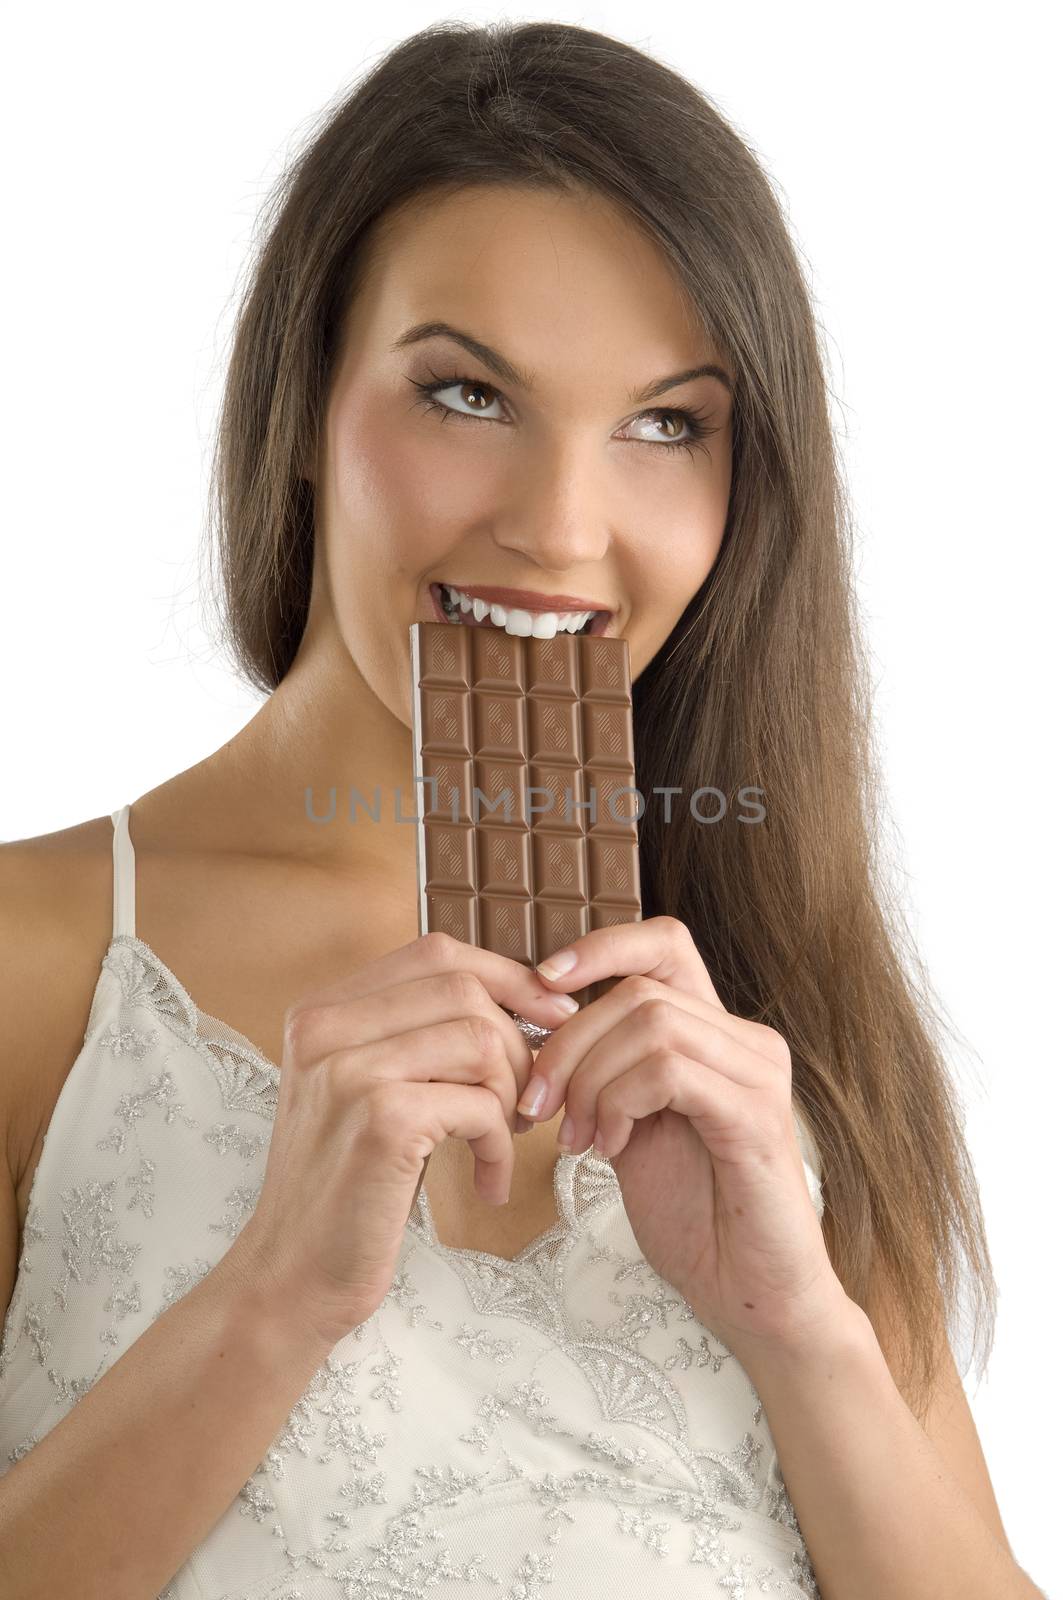 cute young girl bitilng a block of chocolate with her teeth and looking up with eyes